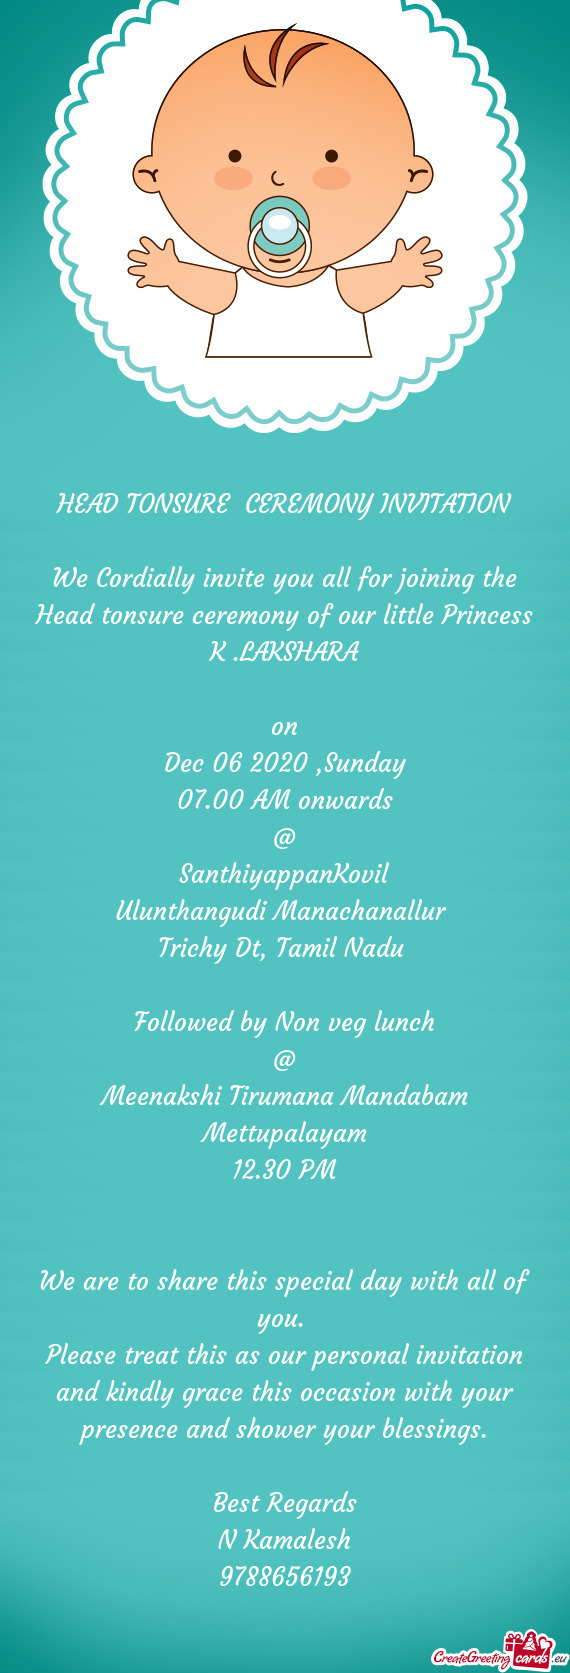 We Cordially invite you all for joining the Head tonsure ceremony of our little Princess K .LAKSHARA